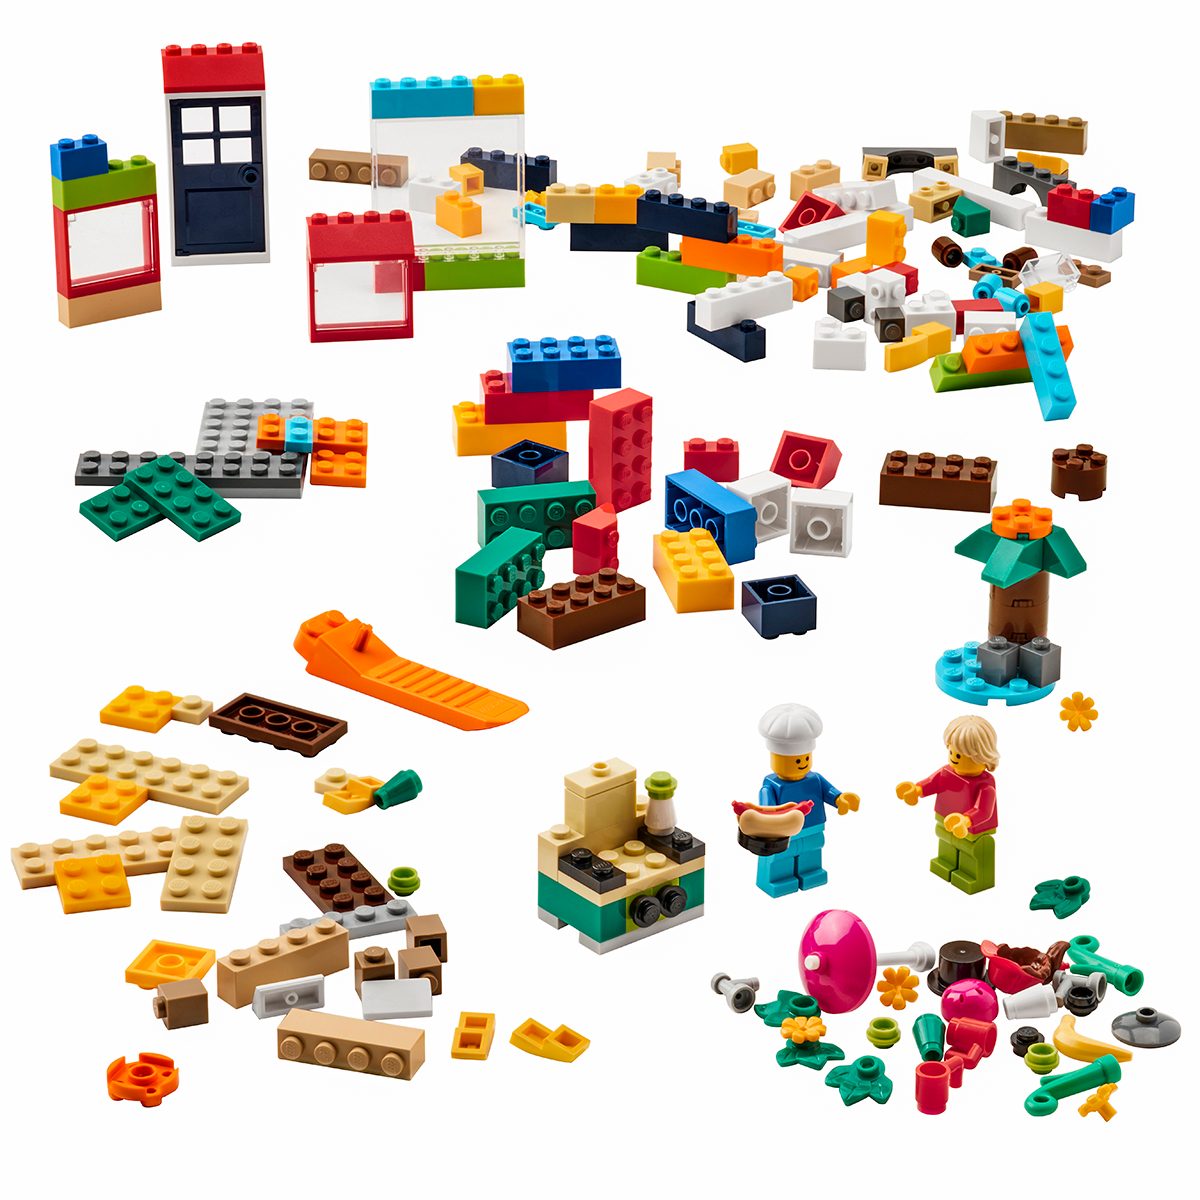 Check Out IKEA's New Collaboration With LEGO | Reader's Digest